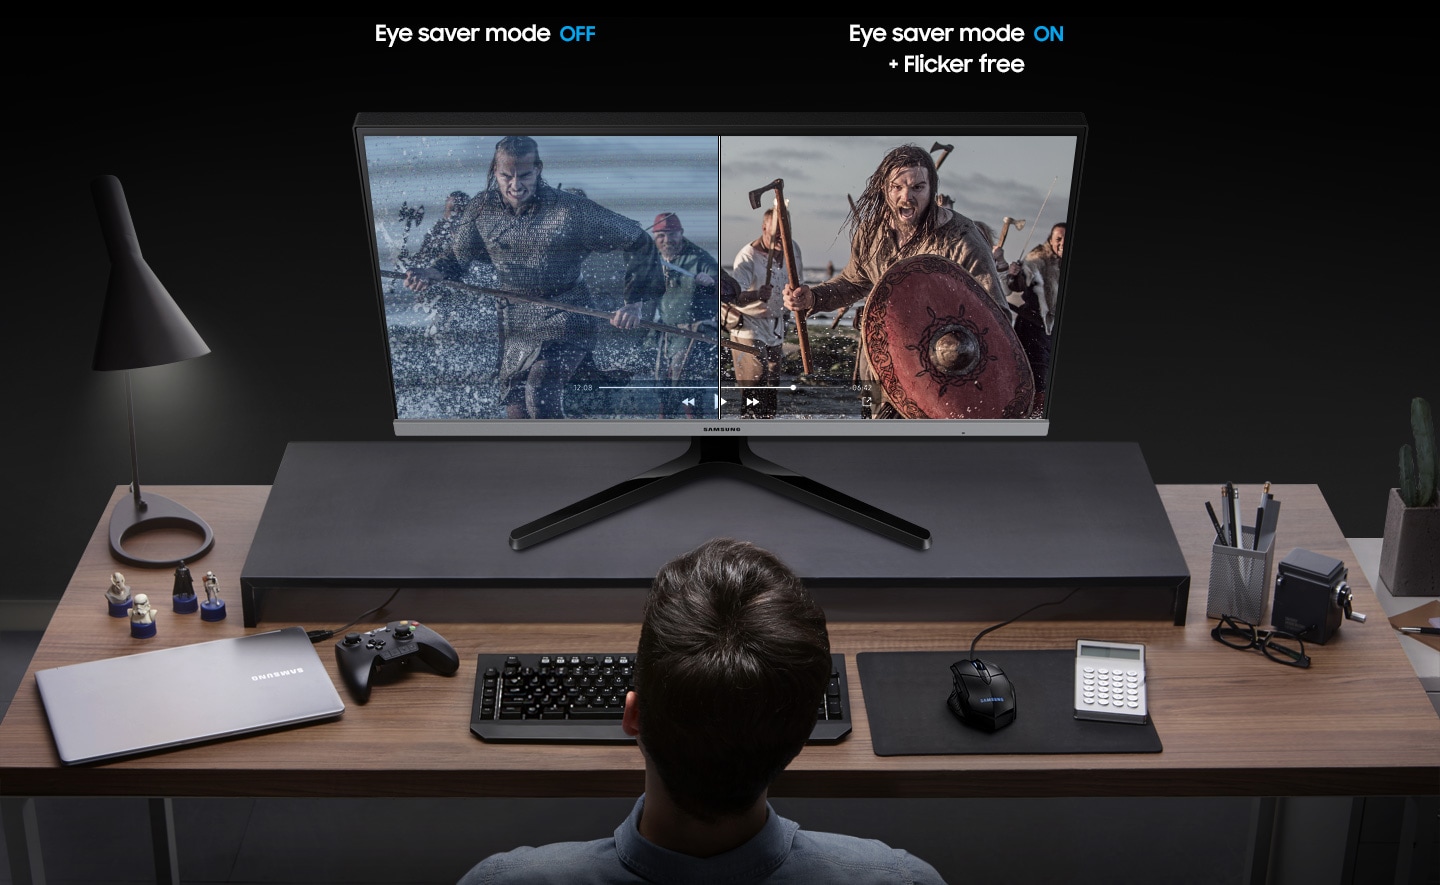 Eye saver mode off and Eye saver mode On + Flicker free comparison. In Eye saver mode off, the blue color is strong and horizontal stripes are visible on the screen, but in Eye saver mode on, a clean and warm color screen is displayed.